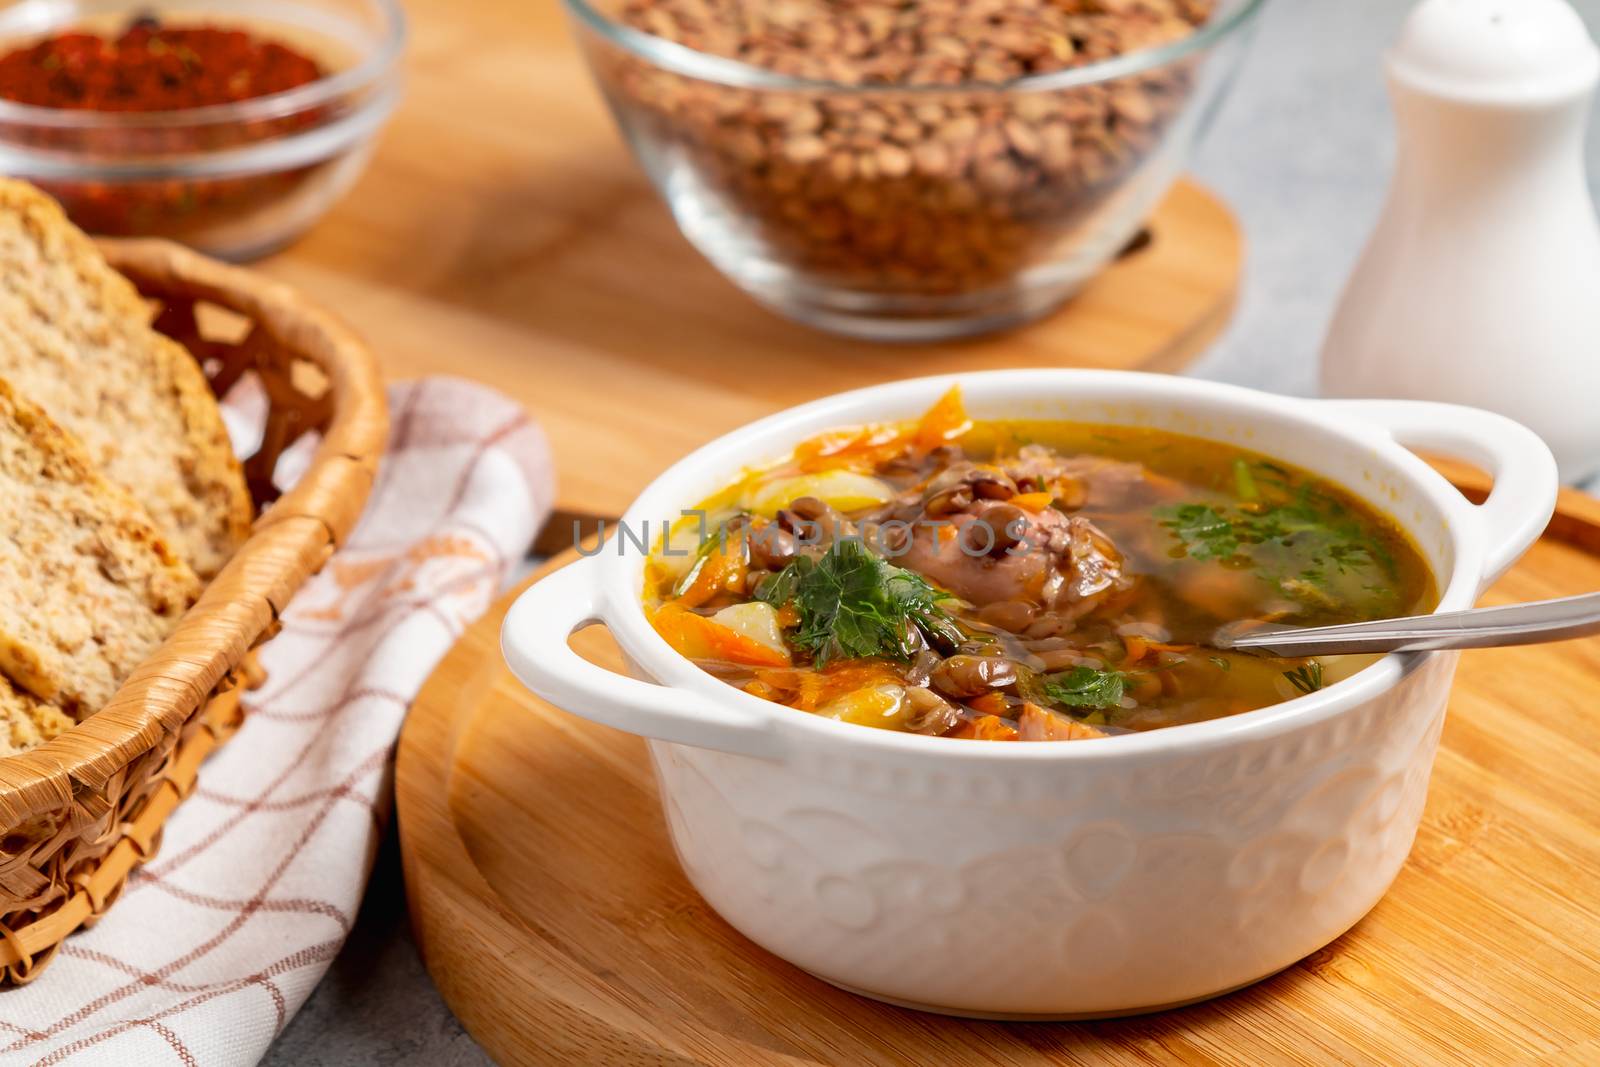 Lentil soup with chicken in a white bowl on a wooden board.